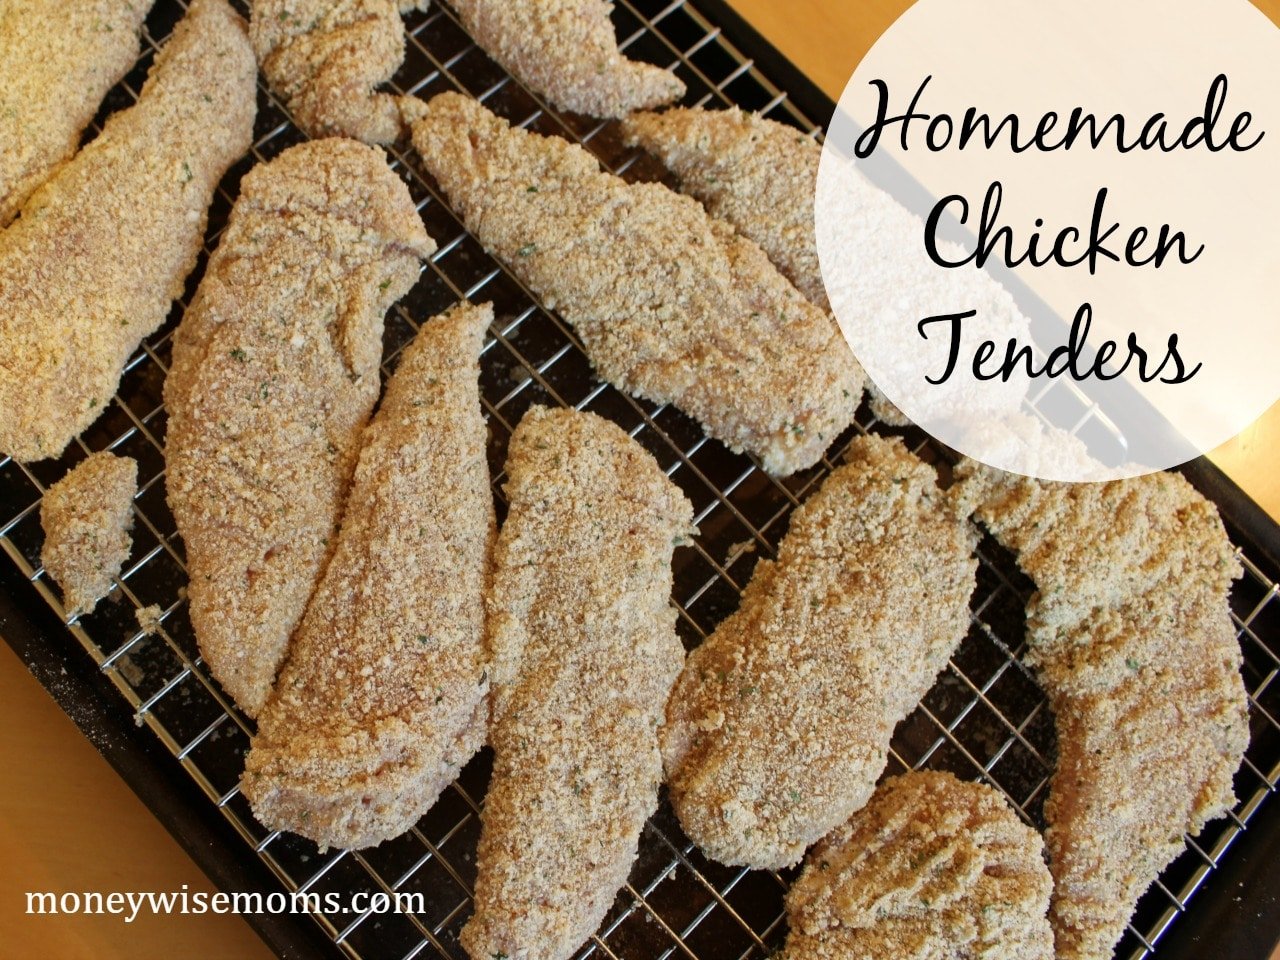 Homemade Chicken Tenders | easy recipe for healthy chicken tenders that taste better than fast food